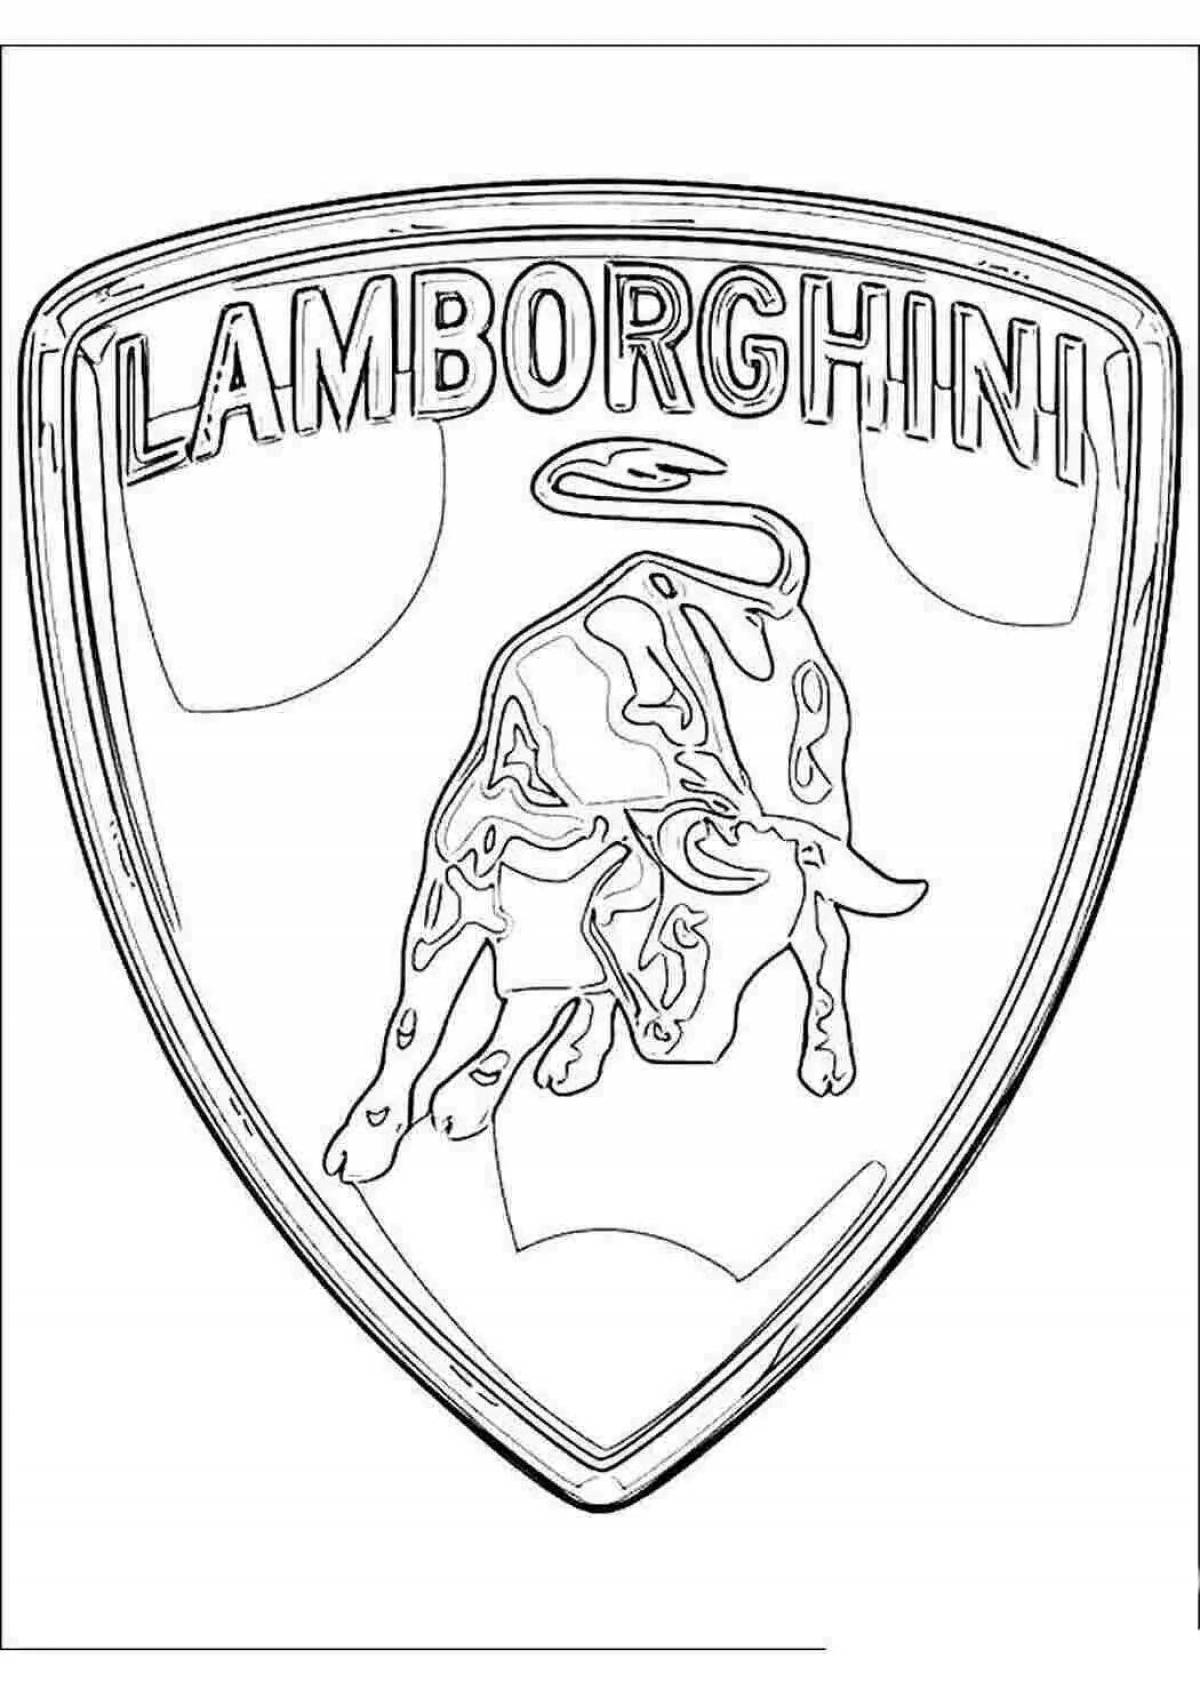 Fabulous car sign coloring page